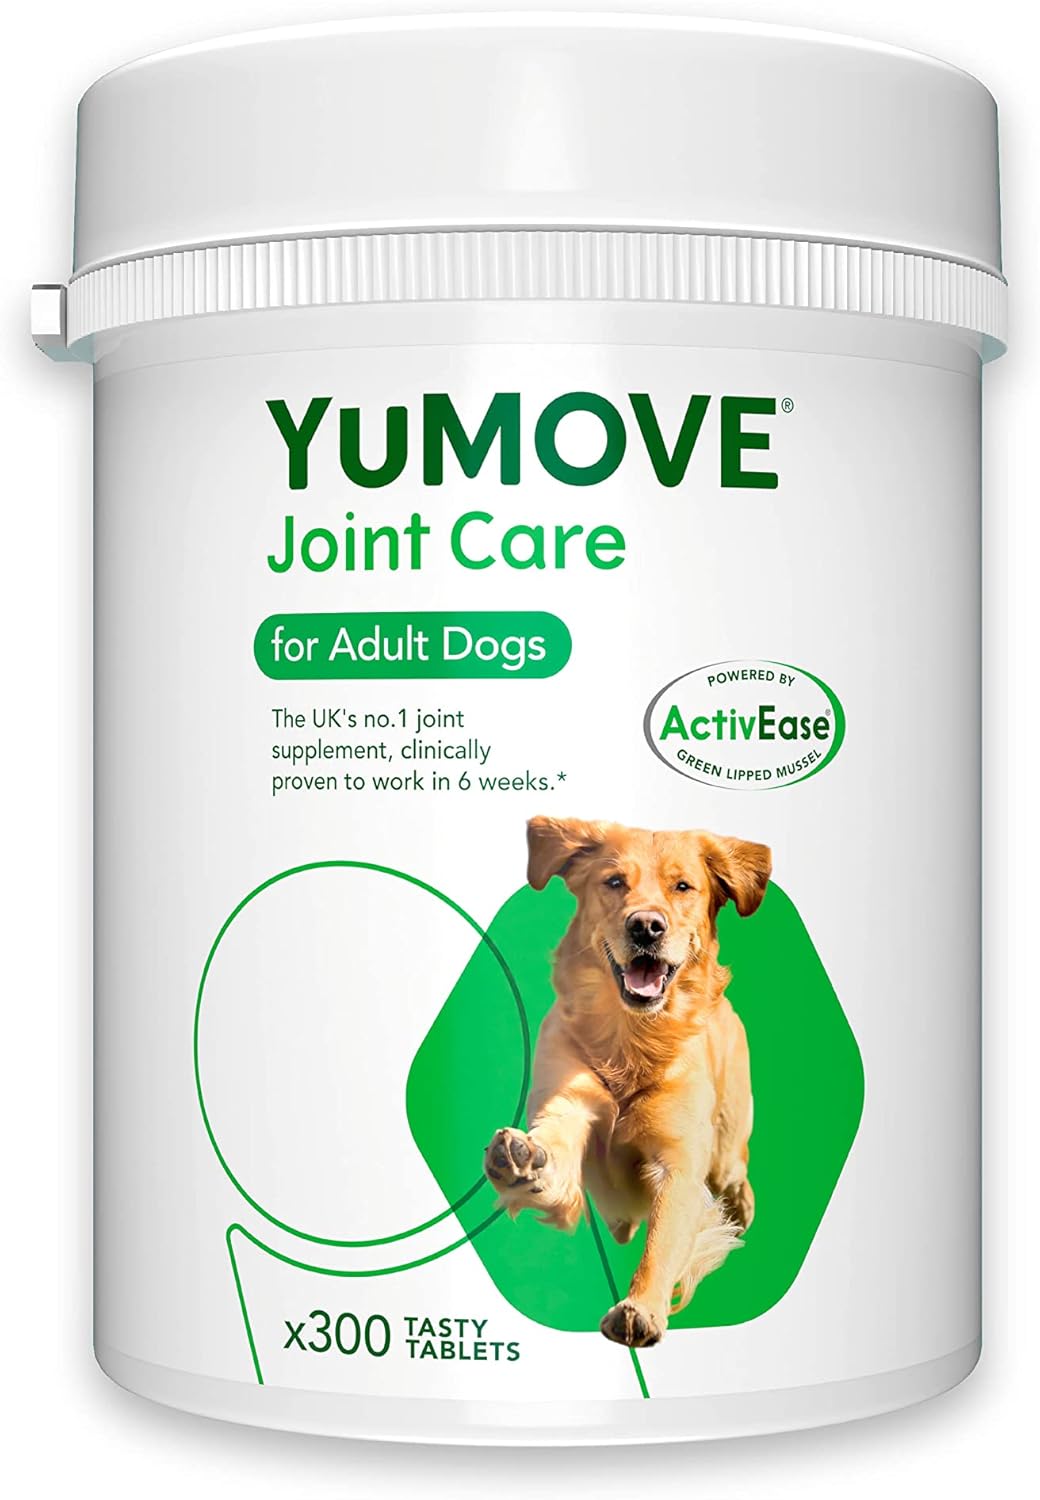 YuMOVE Adult Dog | Joint Supplement for Adult Dogs, with Glucosamine, Chondroitin, Green Lipped Mussel | Aged 6 to 8 | 300?YM300